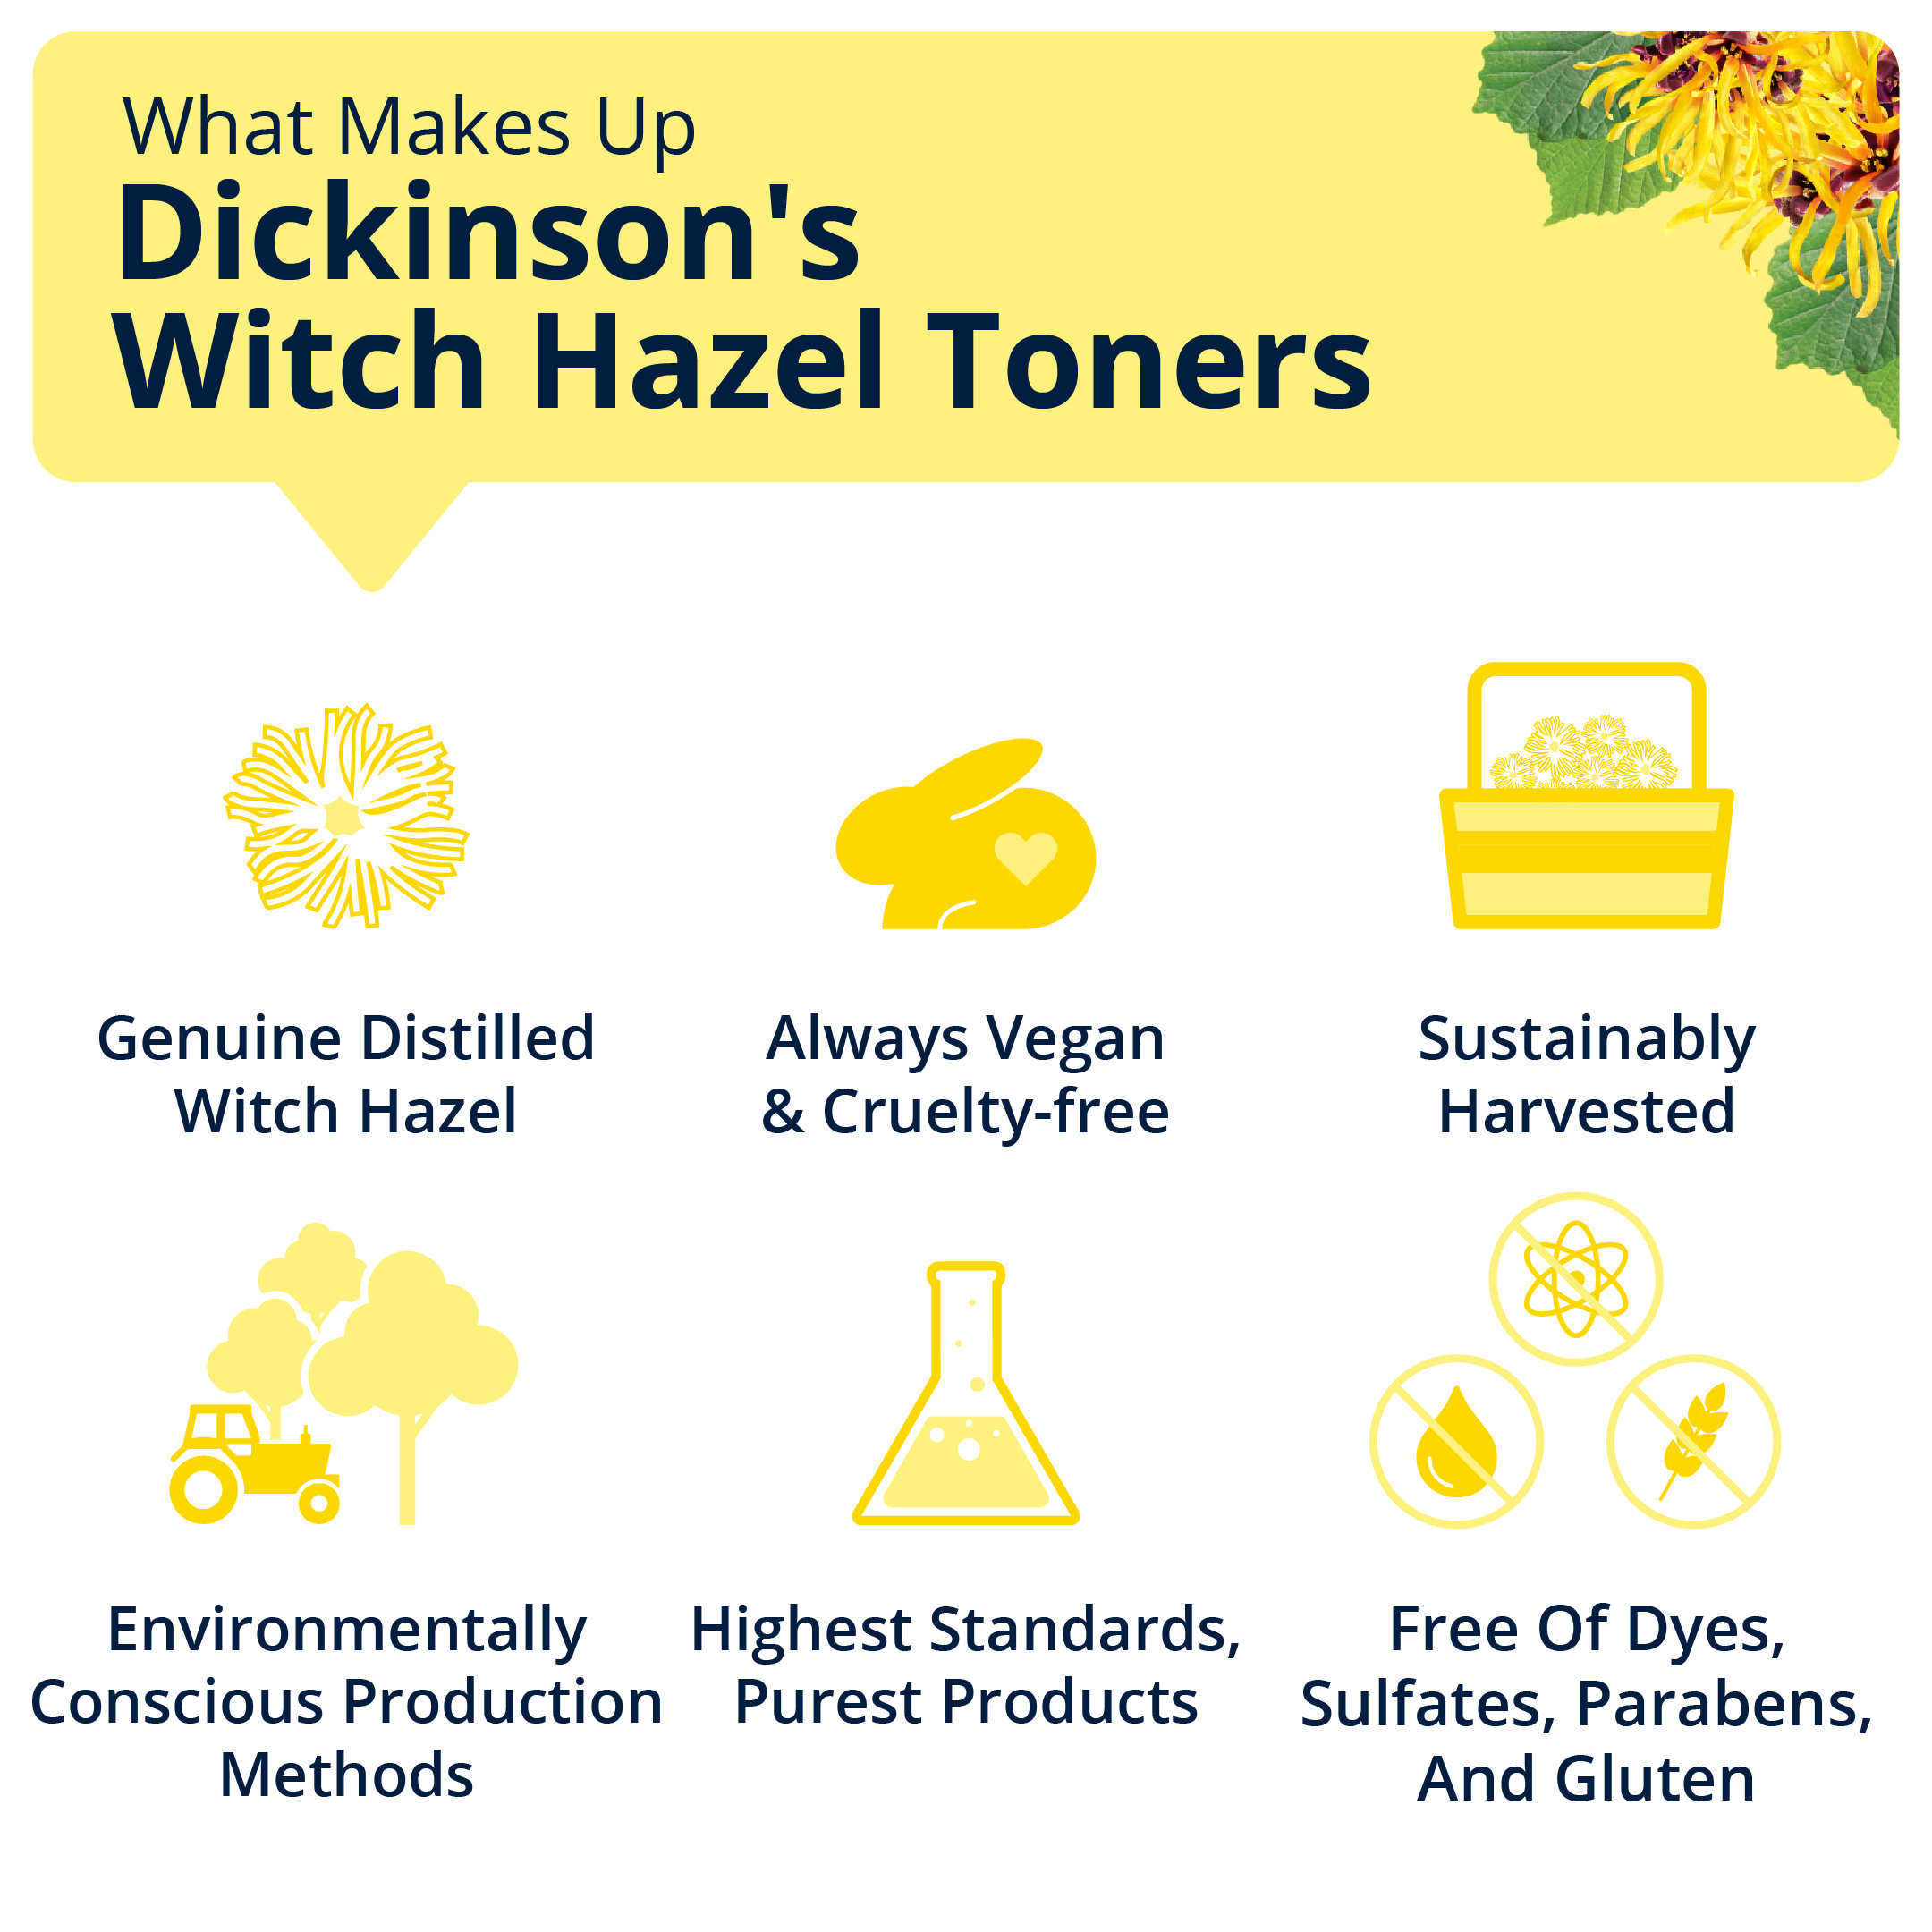 Dickinson's  Alcohol Free Witch Hazel Hydrating Toner with Rosewater, 98% Natural Formula, 16 fl oz - image 4 of 9